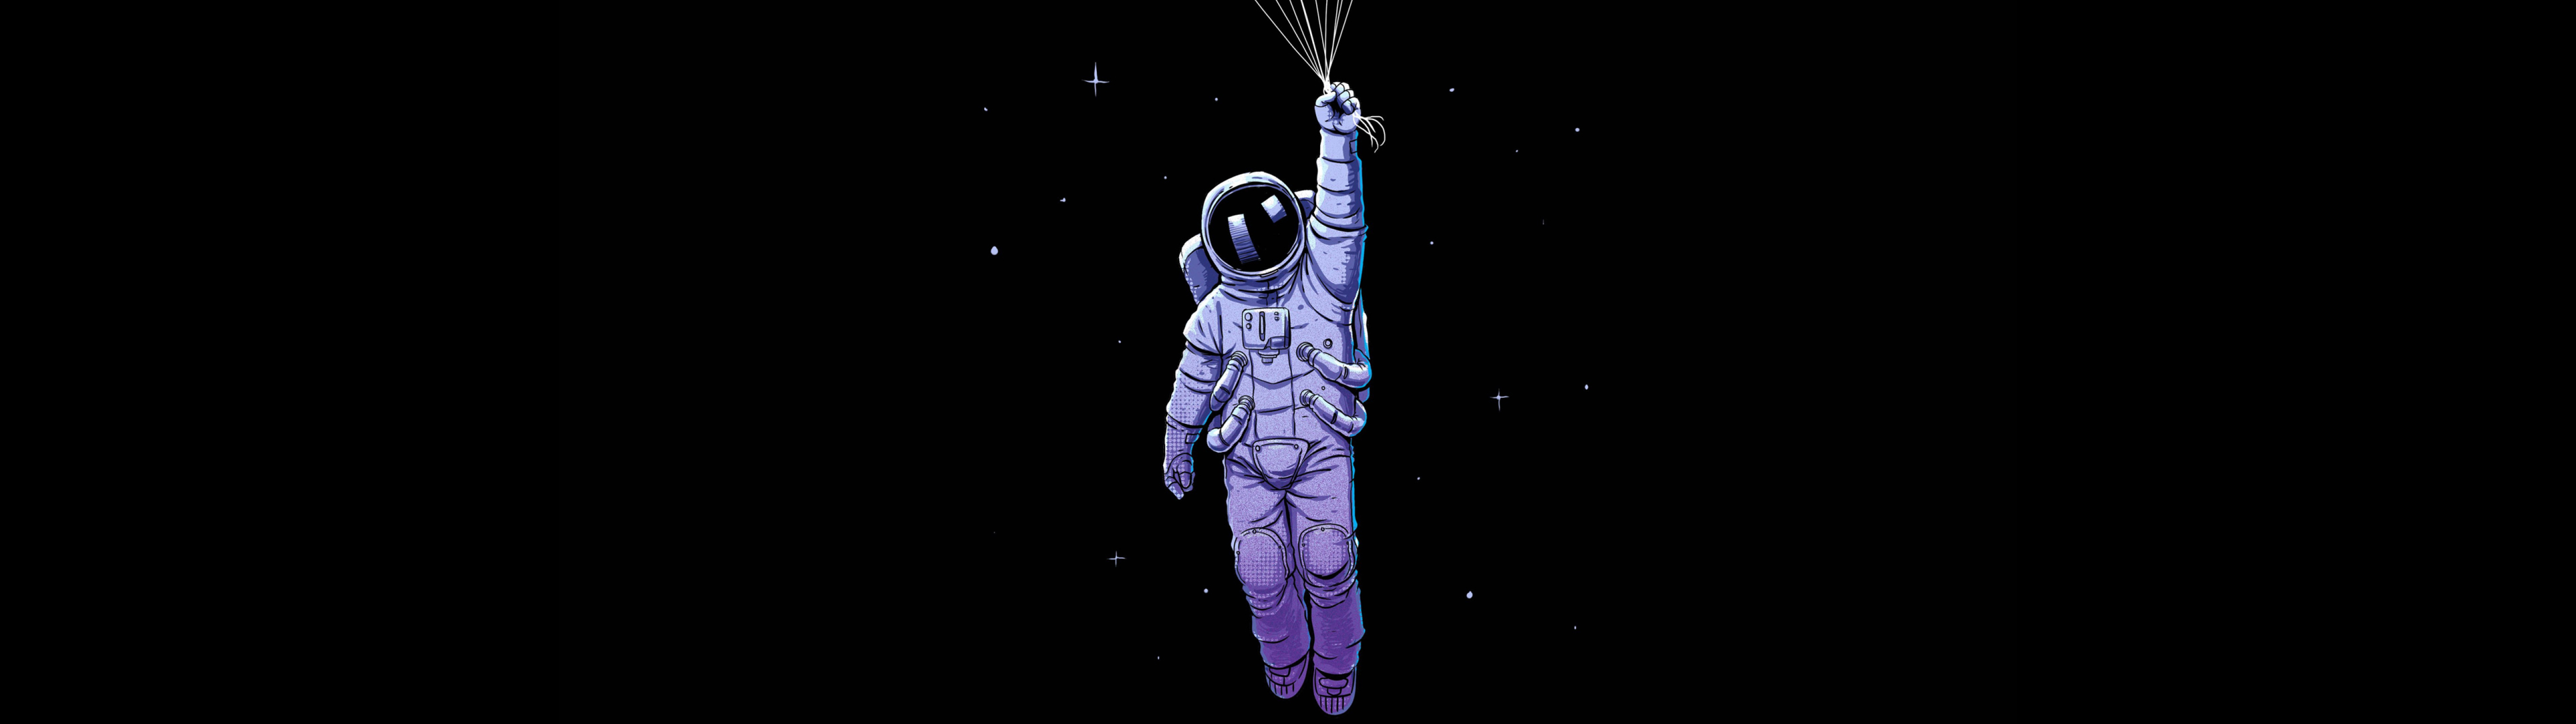 5120x1440 Astronaut Holding of Colorful Balloons 5120x1440 Resolution